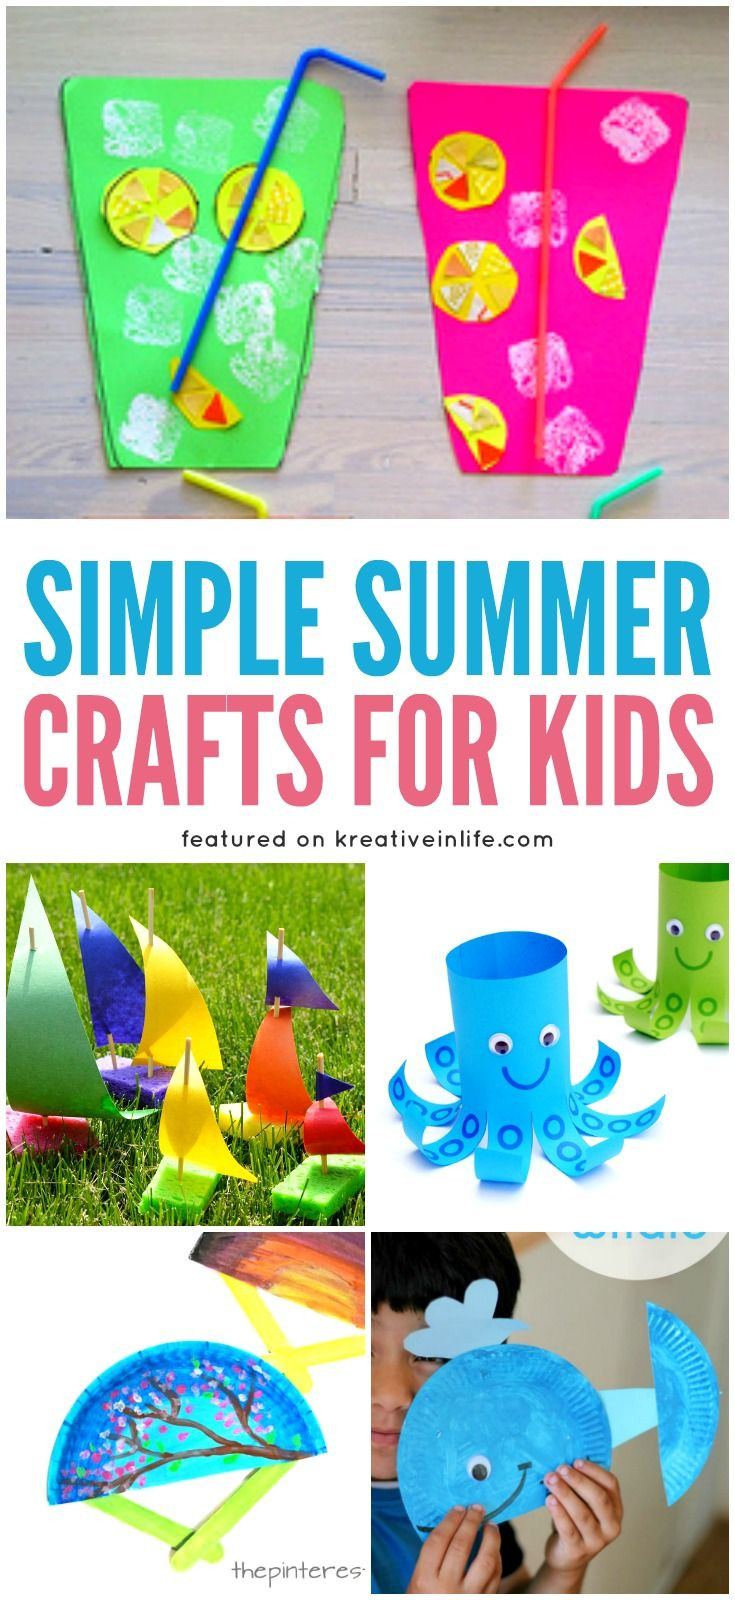 Summer Crafts For Kids+Free Printable Make A Suncatcher That Looks Like ...